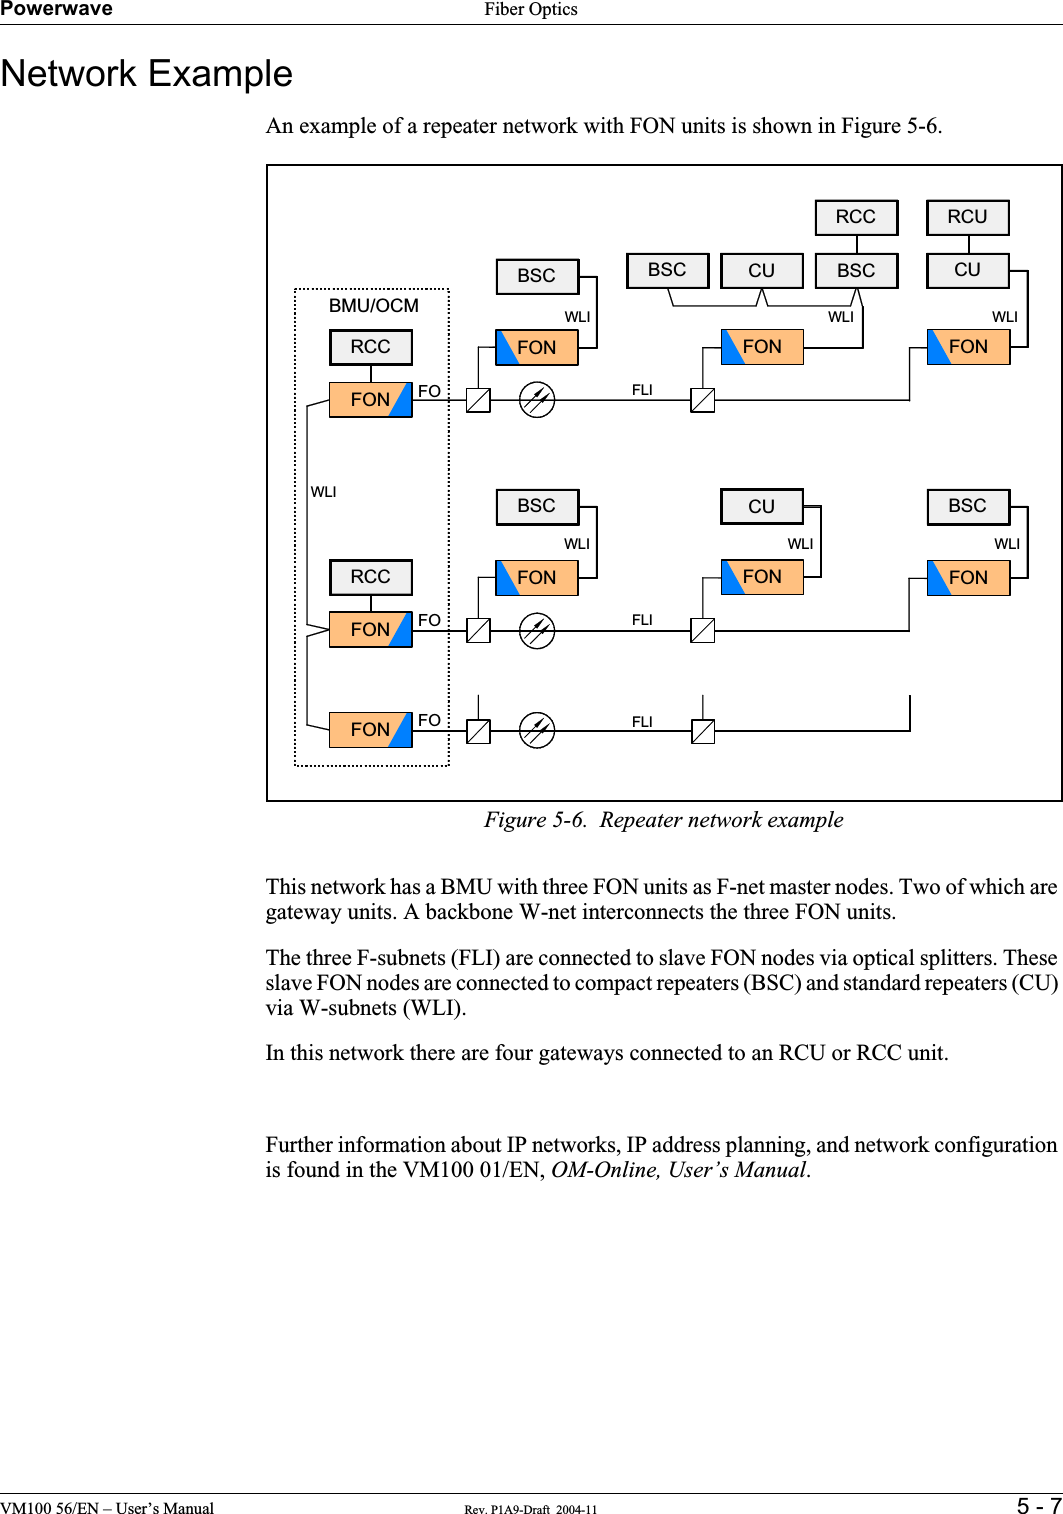 Powerwave Fiber OpticsVM100 56/EN – User’s Manual Rev. P1A9-Draft  2004-11 5 - 7Network ExampleAn example of a repeater network with FON units is shown in Figure 5-6.Figure 5-6.  Repeater network exampleThis network has a BMU with three FON units as F-net master nodes. Two of which are gateway units. A backbone W-net interconnects the three FON units.The three F-subnets (FLI) are connected to slave FON nodes via optical splitters. These slave FON nodes are connected to compact repeaters (BSC) and standard repeaters (CU) via W-subnets (WLI).In this network there are four gateways connected to an RCU or RCC unit.Further information about IP networks, IP address planning, and network configuration is found in the VM100 01/EN, OM-Online, User’s Manual.RCCRCCBMU/OCMBSCWLIWLIFLIFLIFLIWLIFOFONFOFOFONFONFONBSCWLIFONWLIFONBSCWLIFONCUWLIFONCURCUBSC BSCRCCFONCU